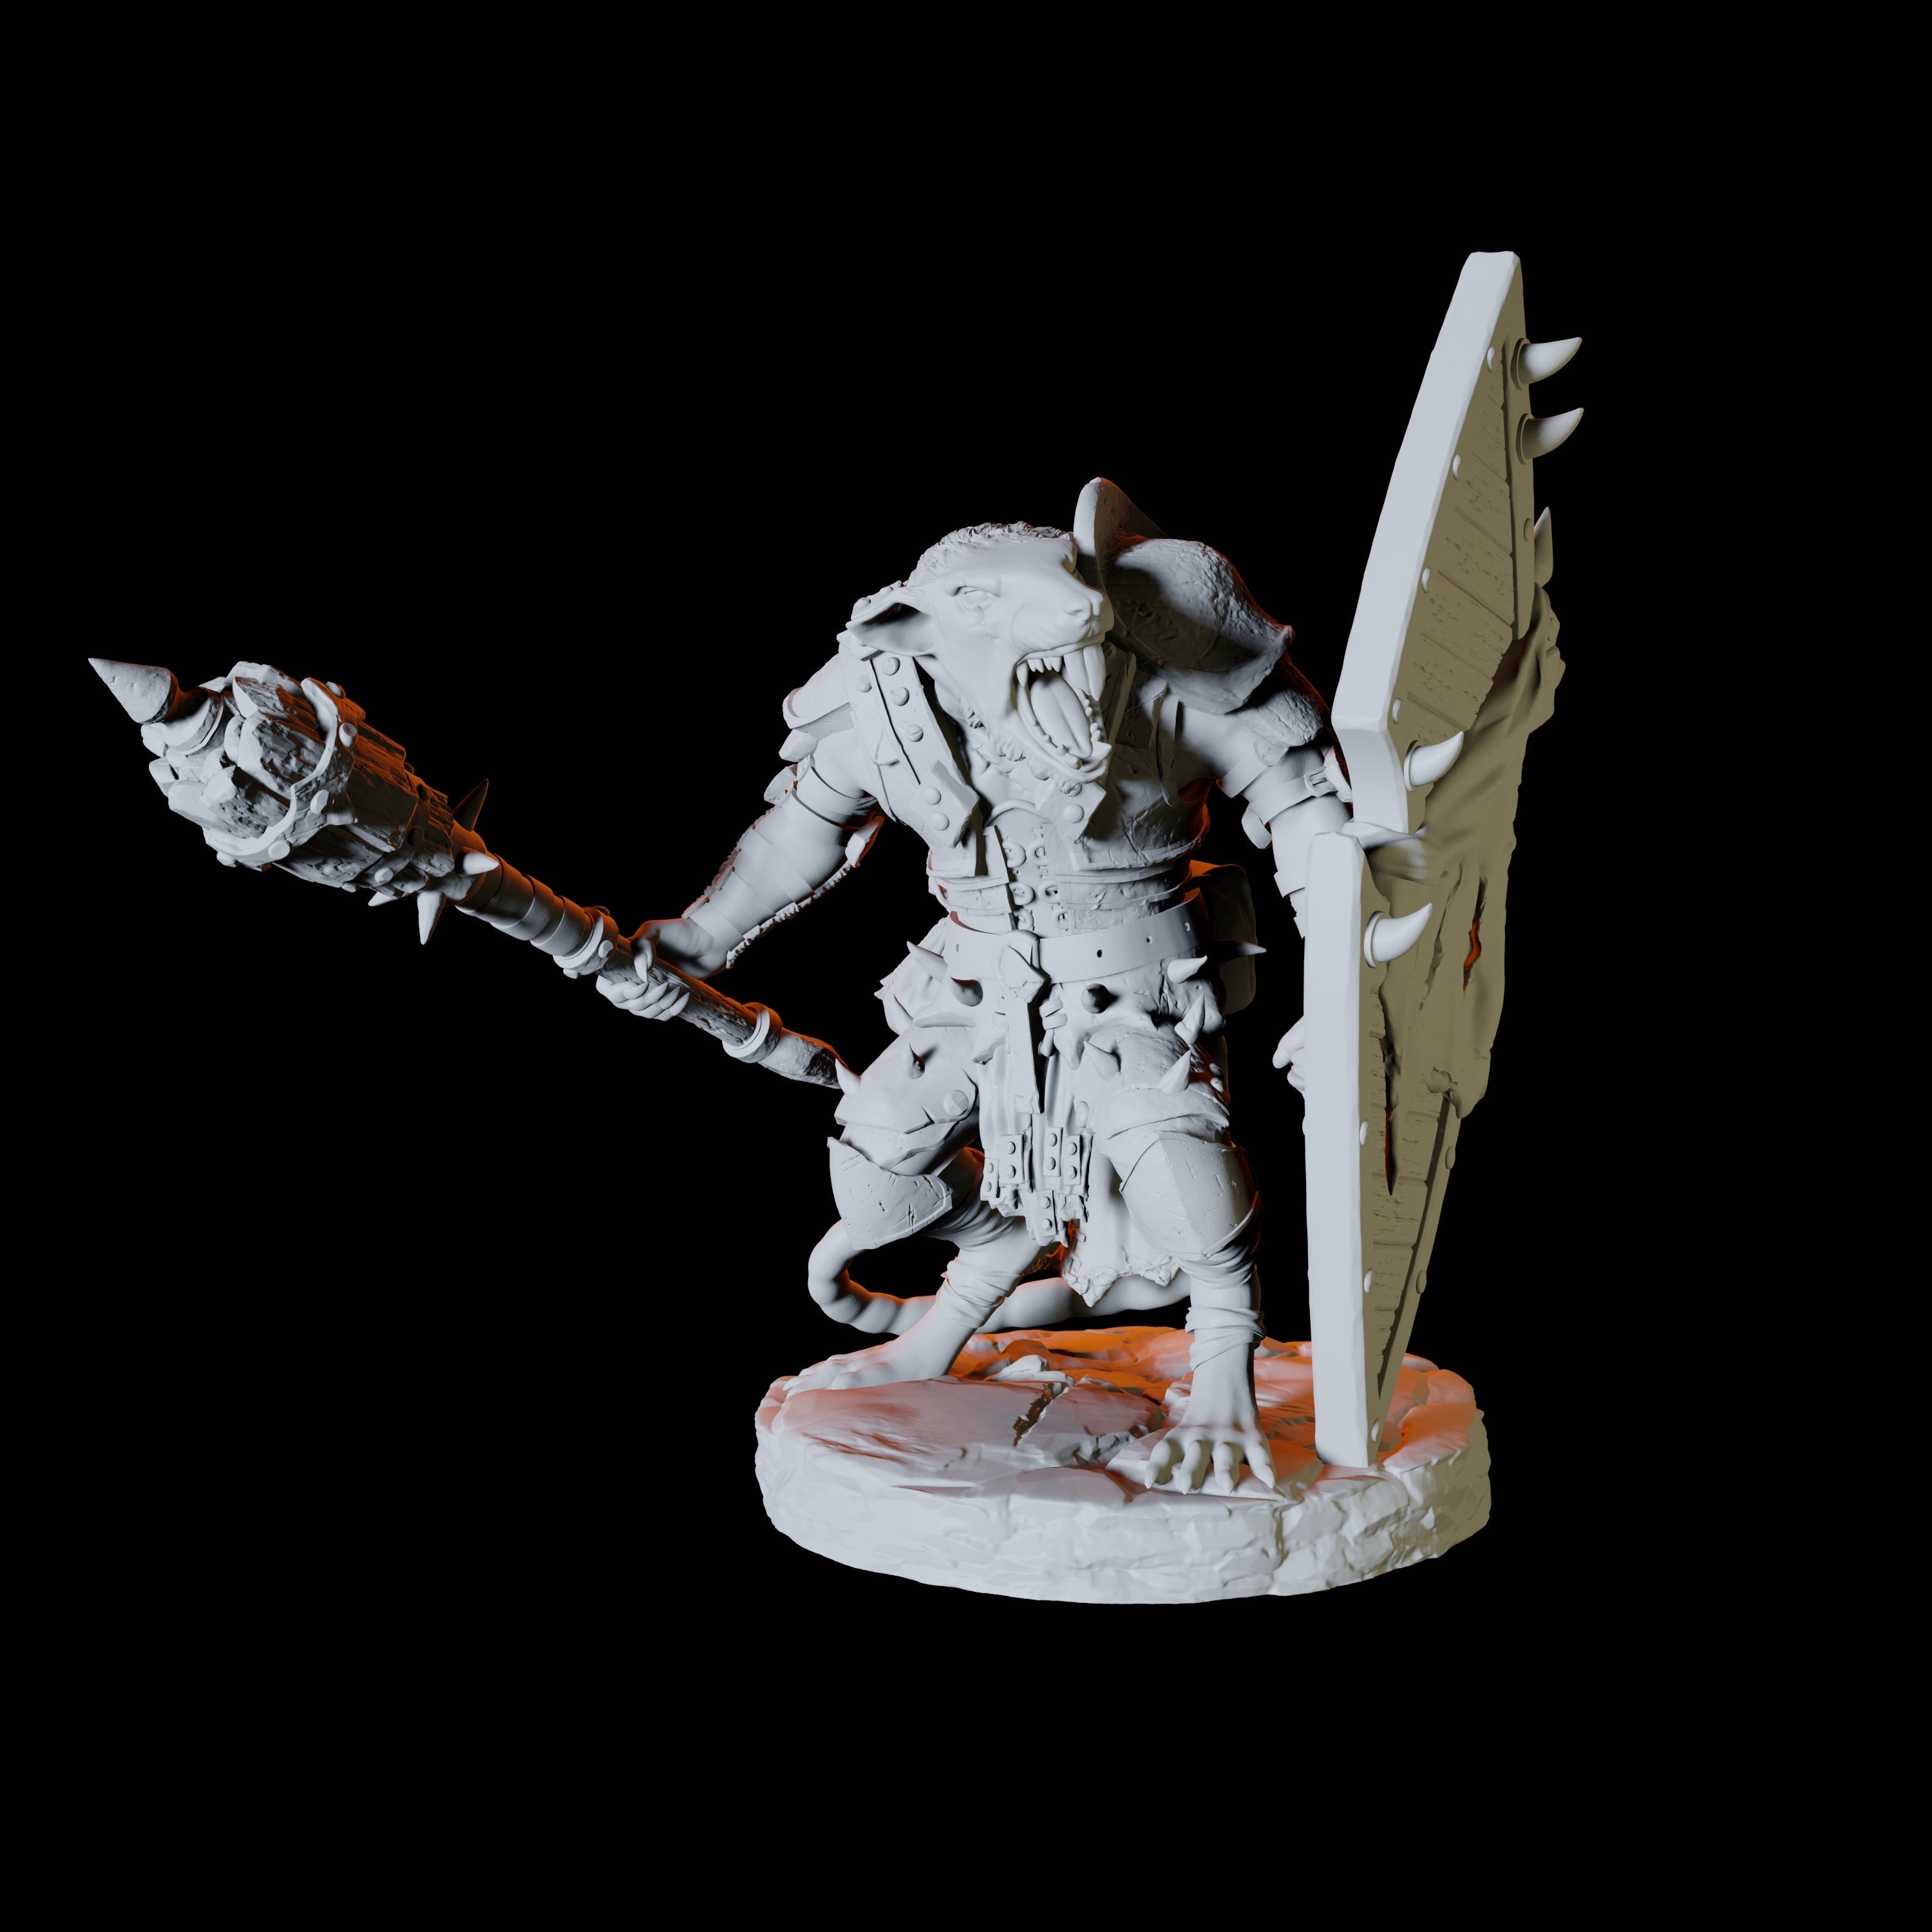 Ratfolk Scout C Miniature for Dungeons and Dragons, Pathfinder or other TTRPGs